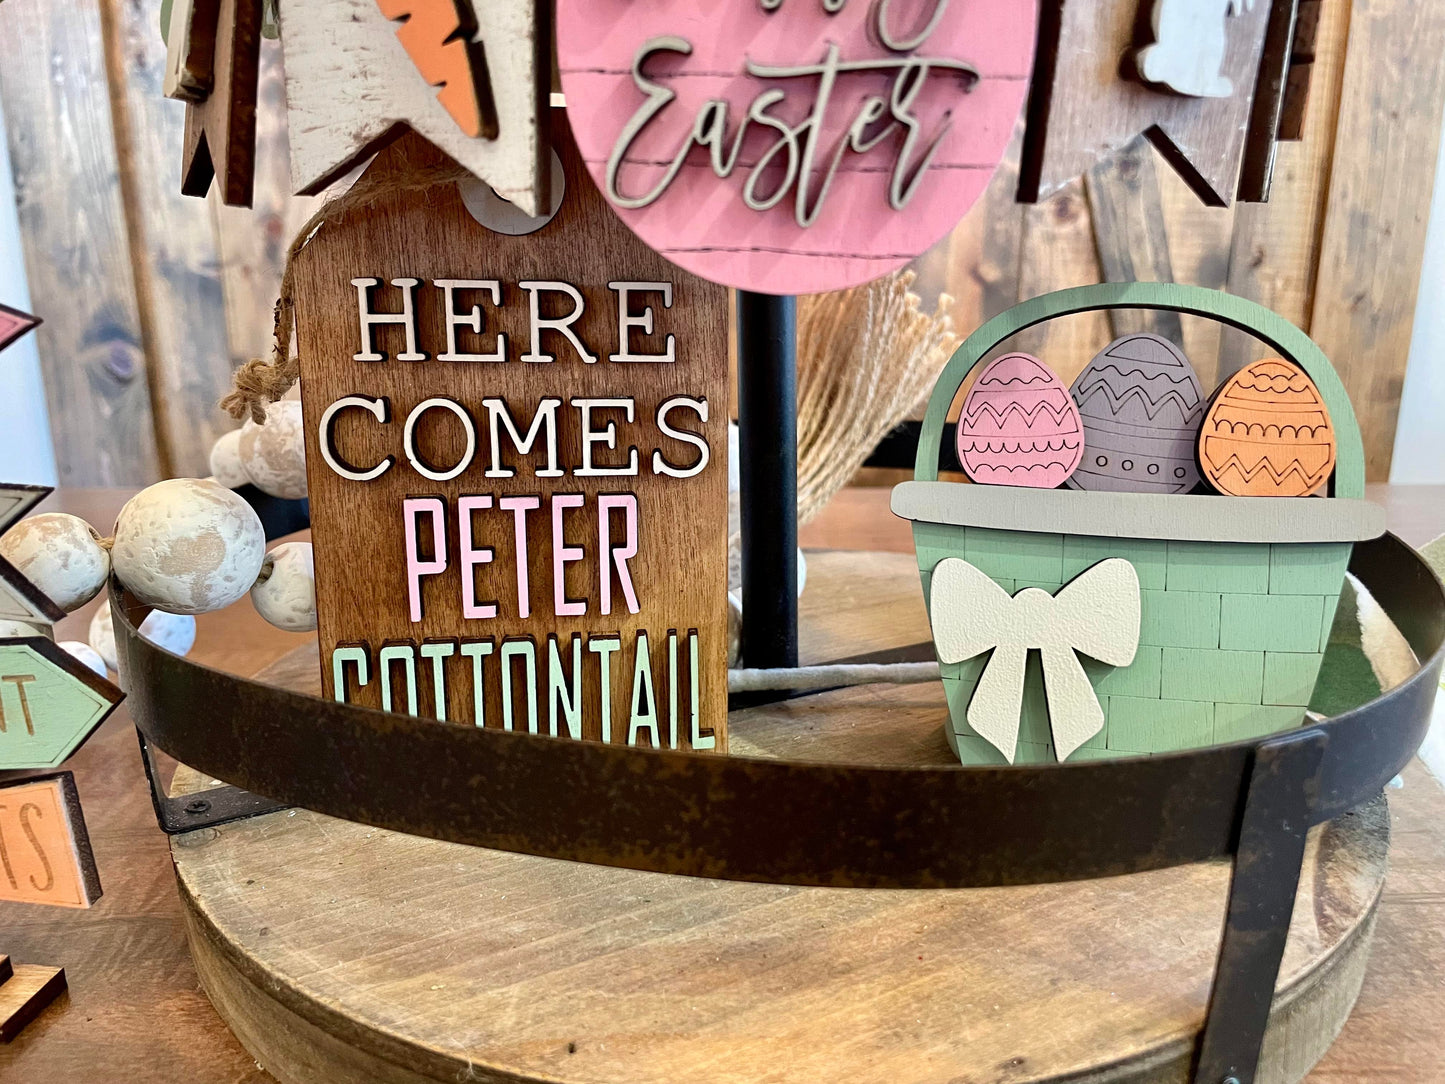 3D Tiered Tray Decor - Peter Cottontail